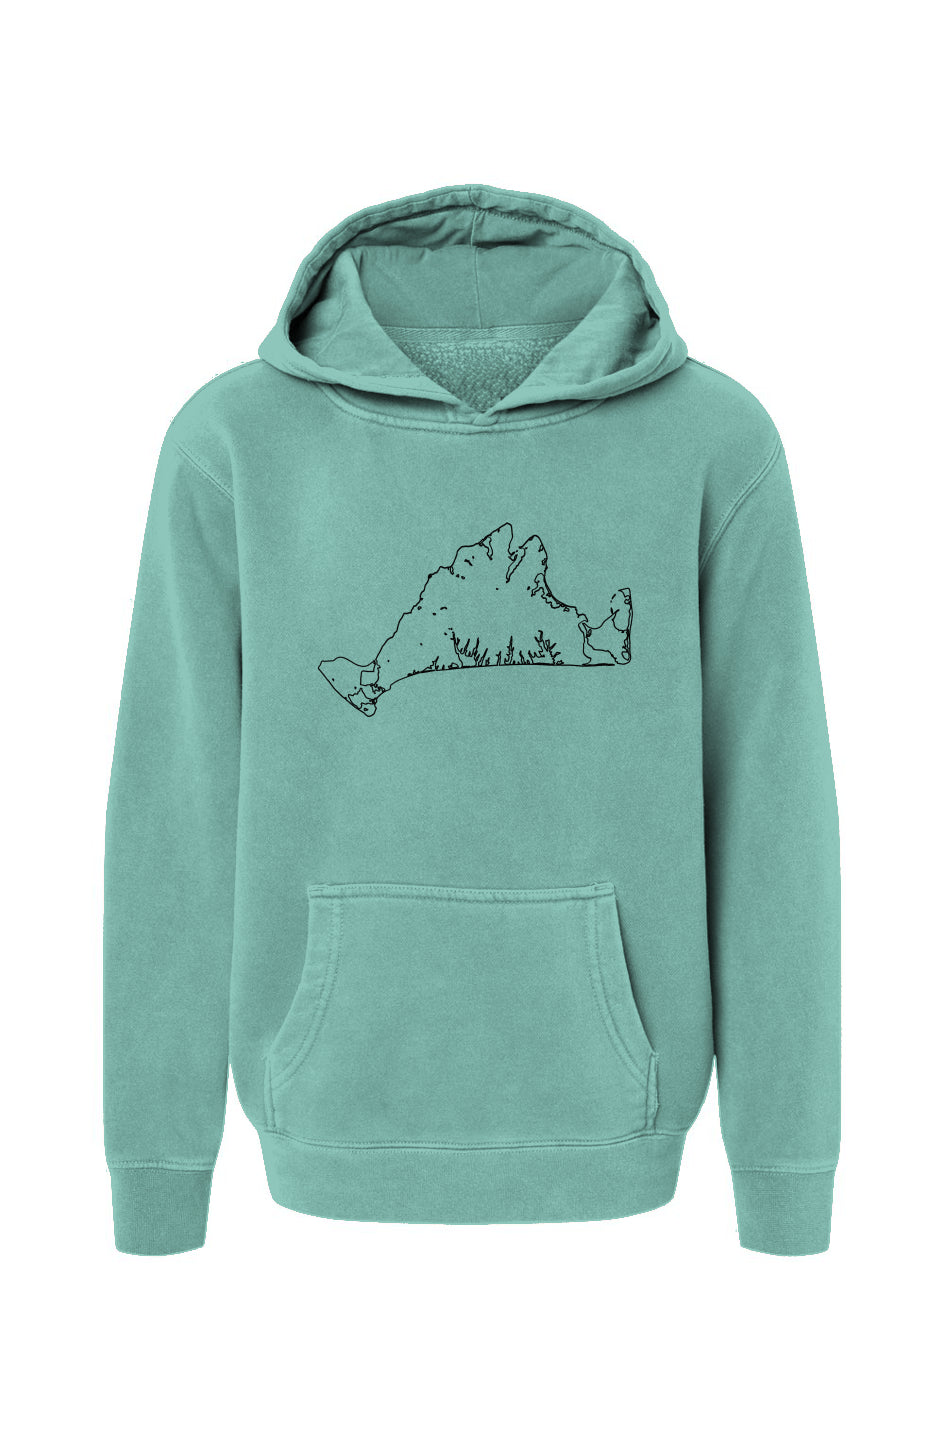 Island Outline Youth Hoodie